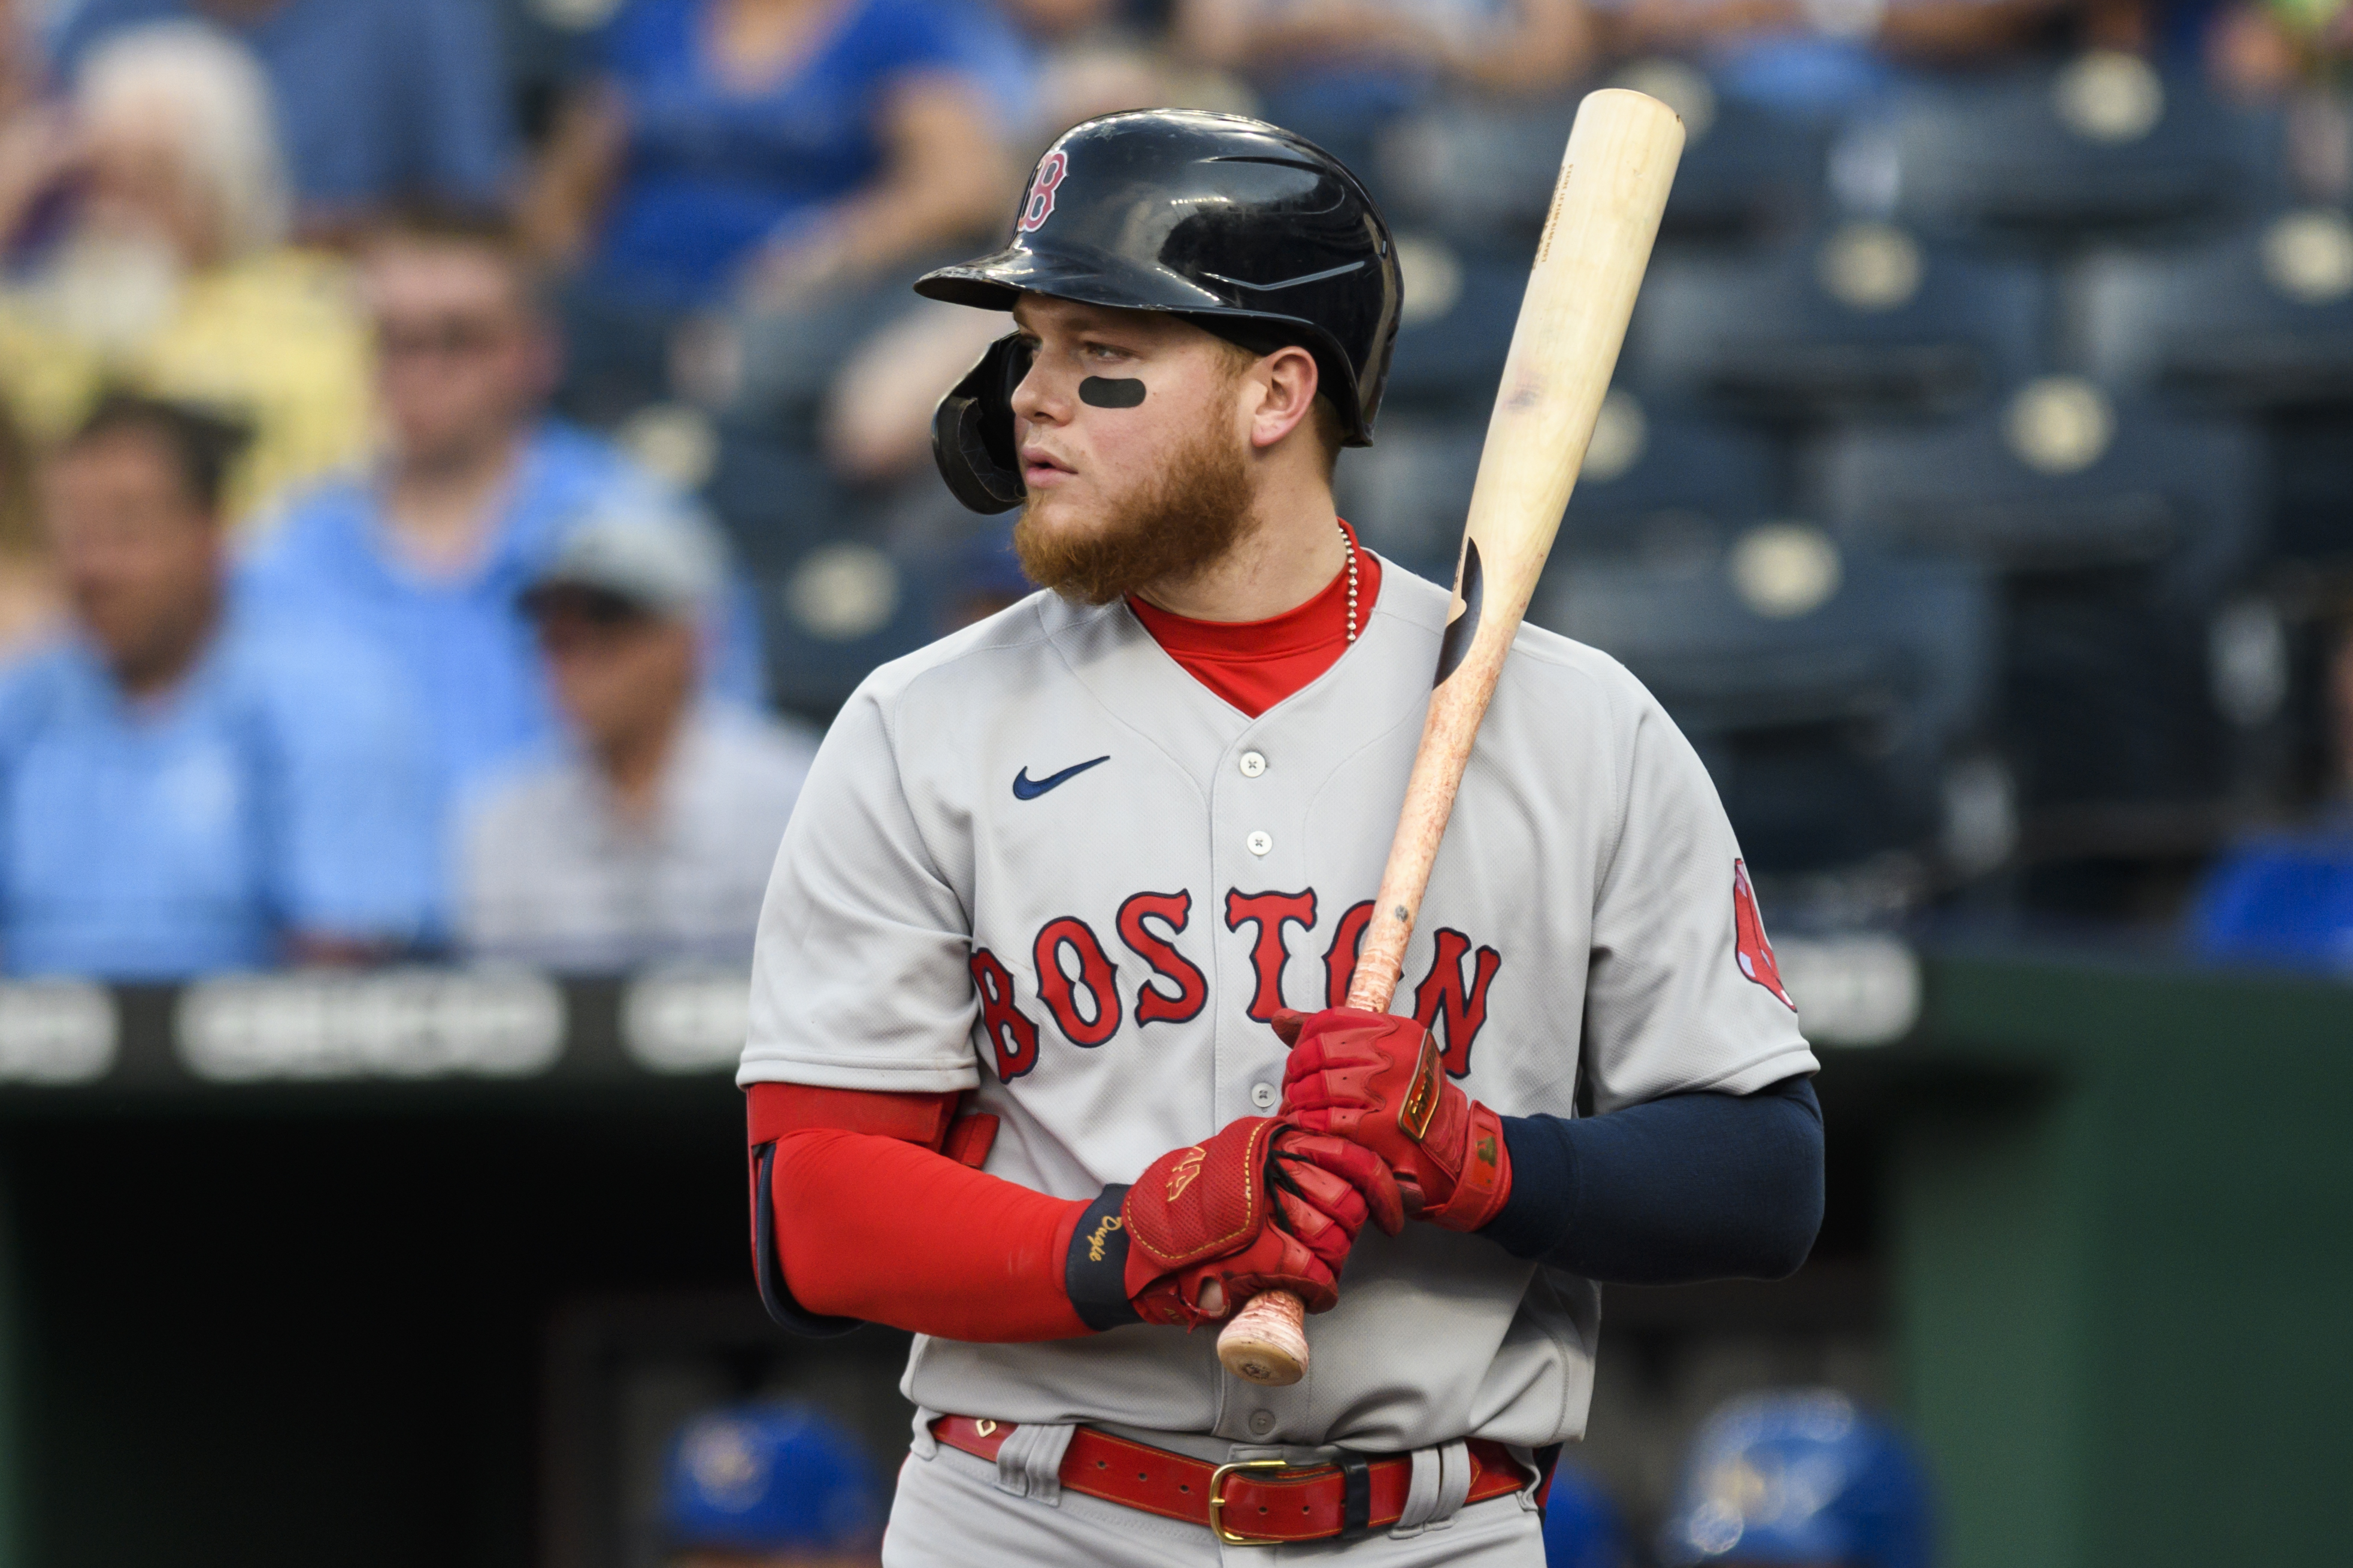 Alex Verdugo on Boston Red Sox: 'This win was huge. The scuffle's